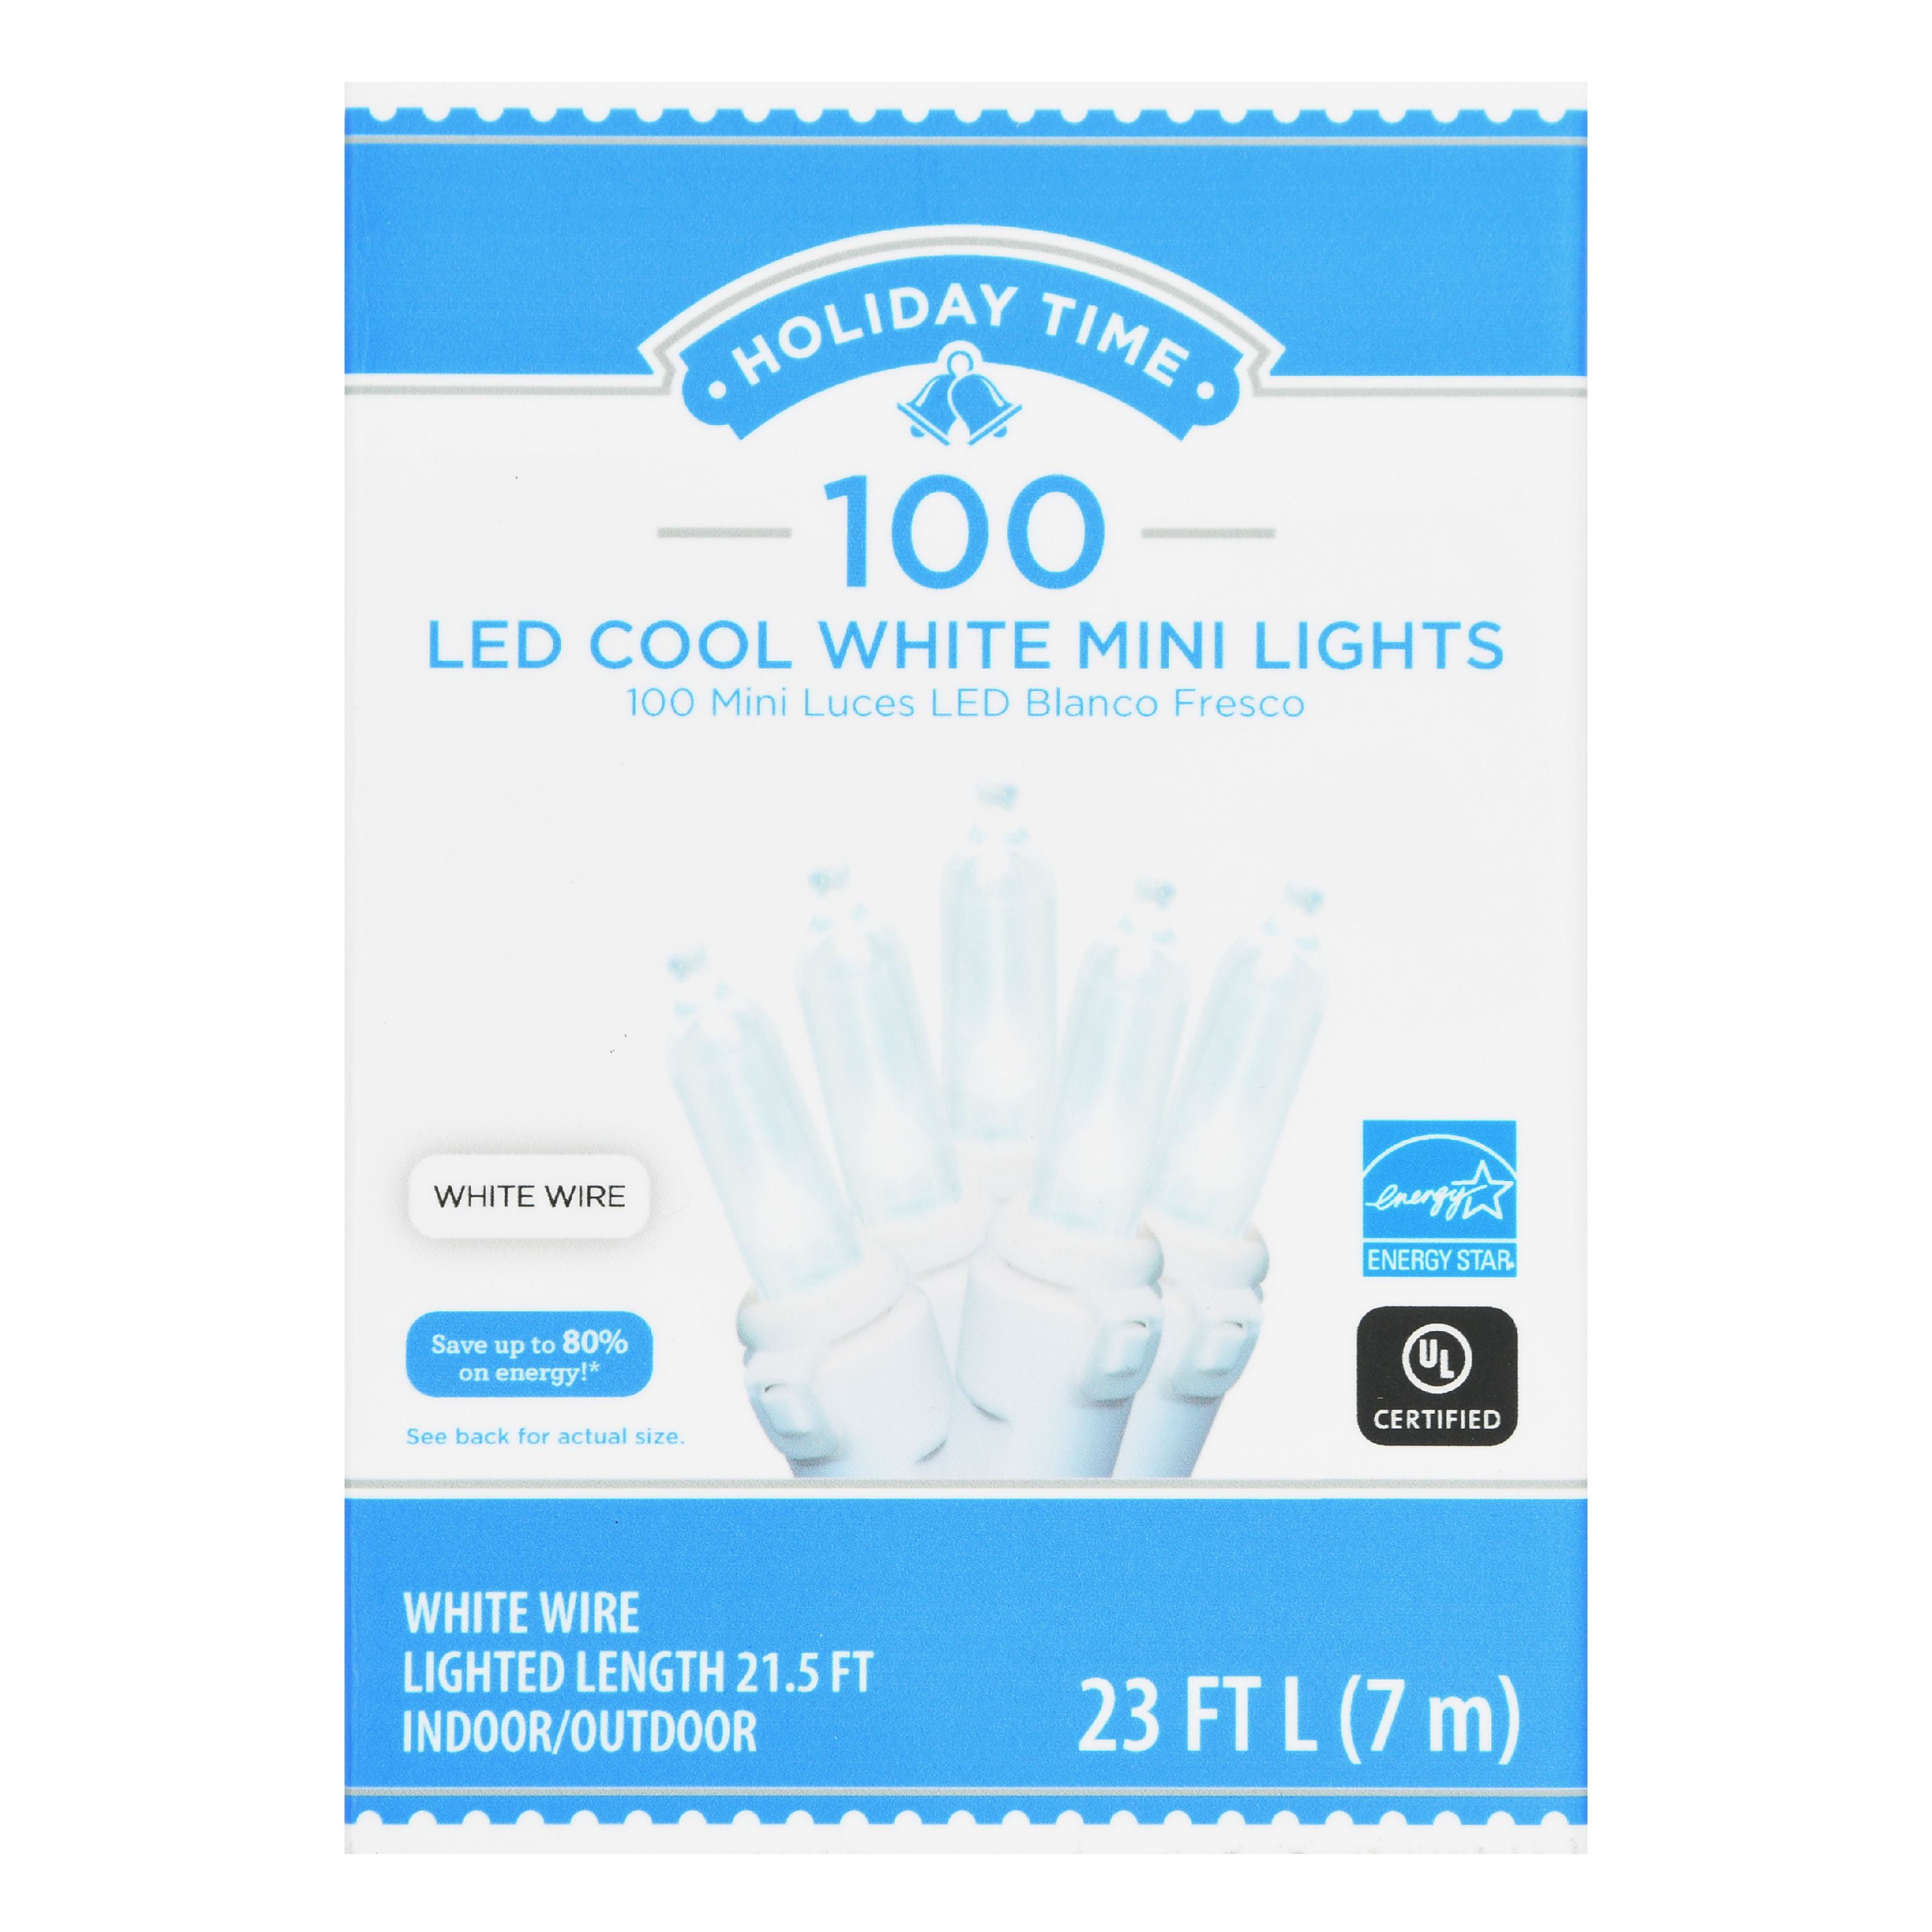 Lot of 3 Holiday Time 50 LED COOL WHITE Mini Lights  *WHITE WIRE*  Wedding NEW 